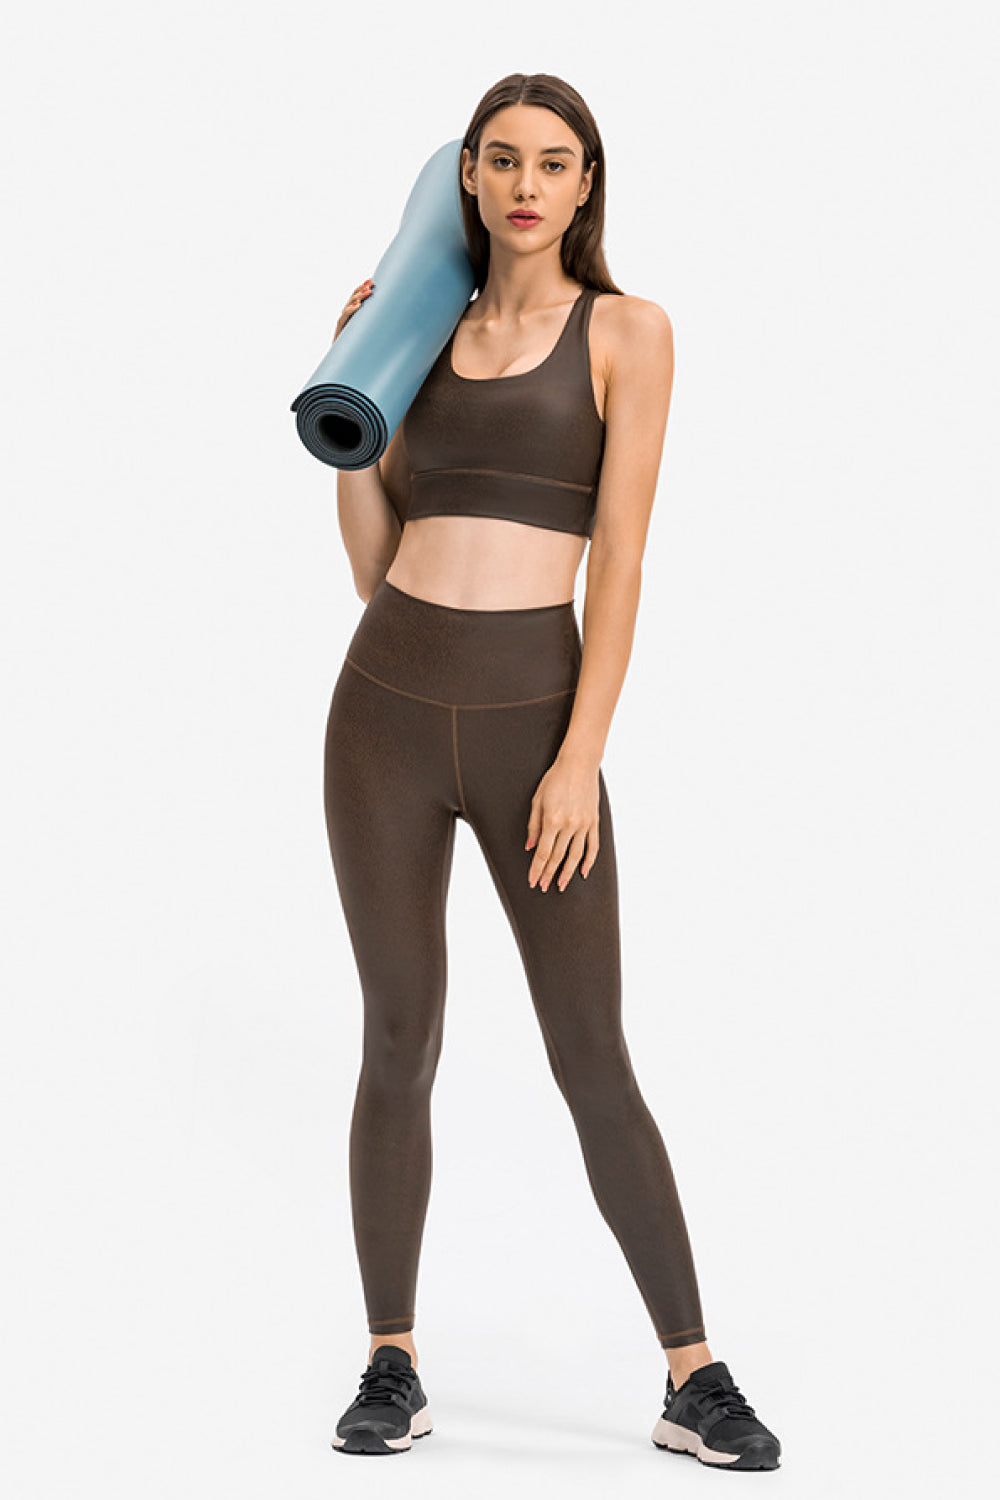 Invisible Pocket Sports Leggings  | KIKI COUTURE-Women's Clothing, Designer Fashions, Shoes, Bags